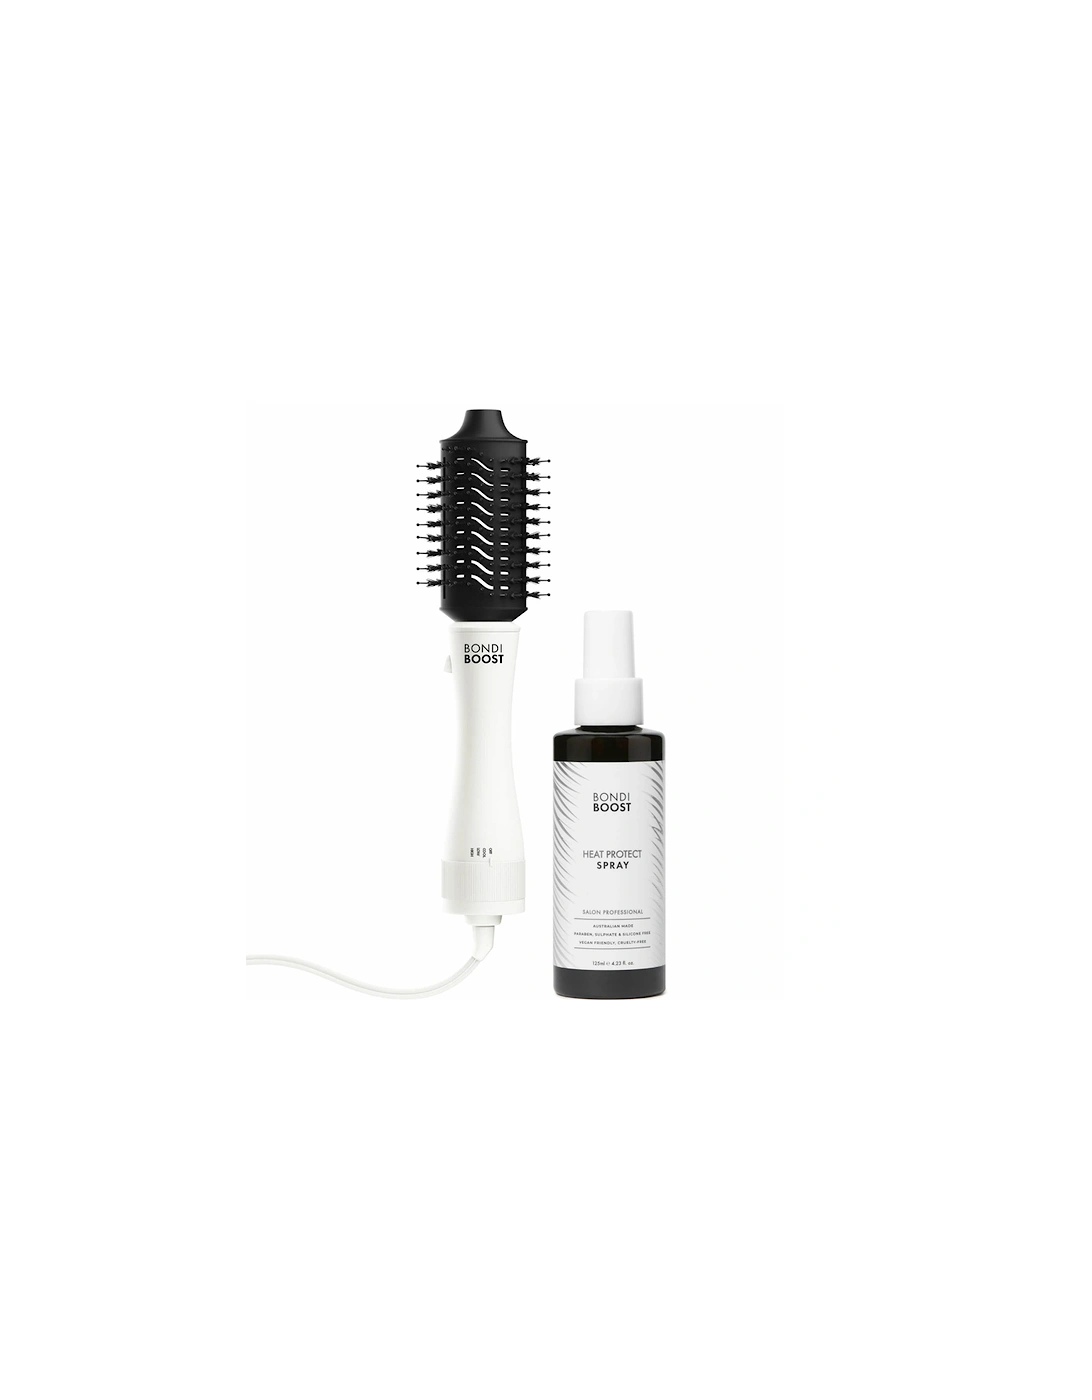 51mm Blowout Brush and Heat Protect Spray 125ml Bundle, 2 of 1